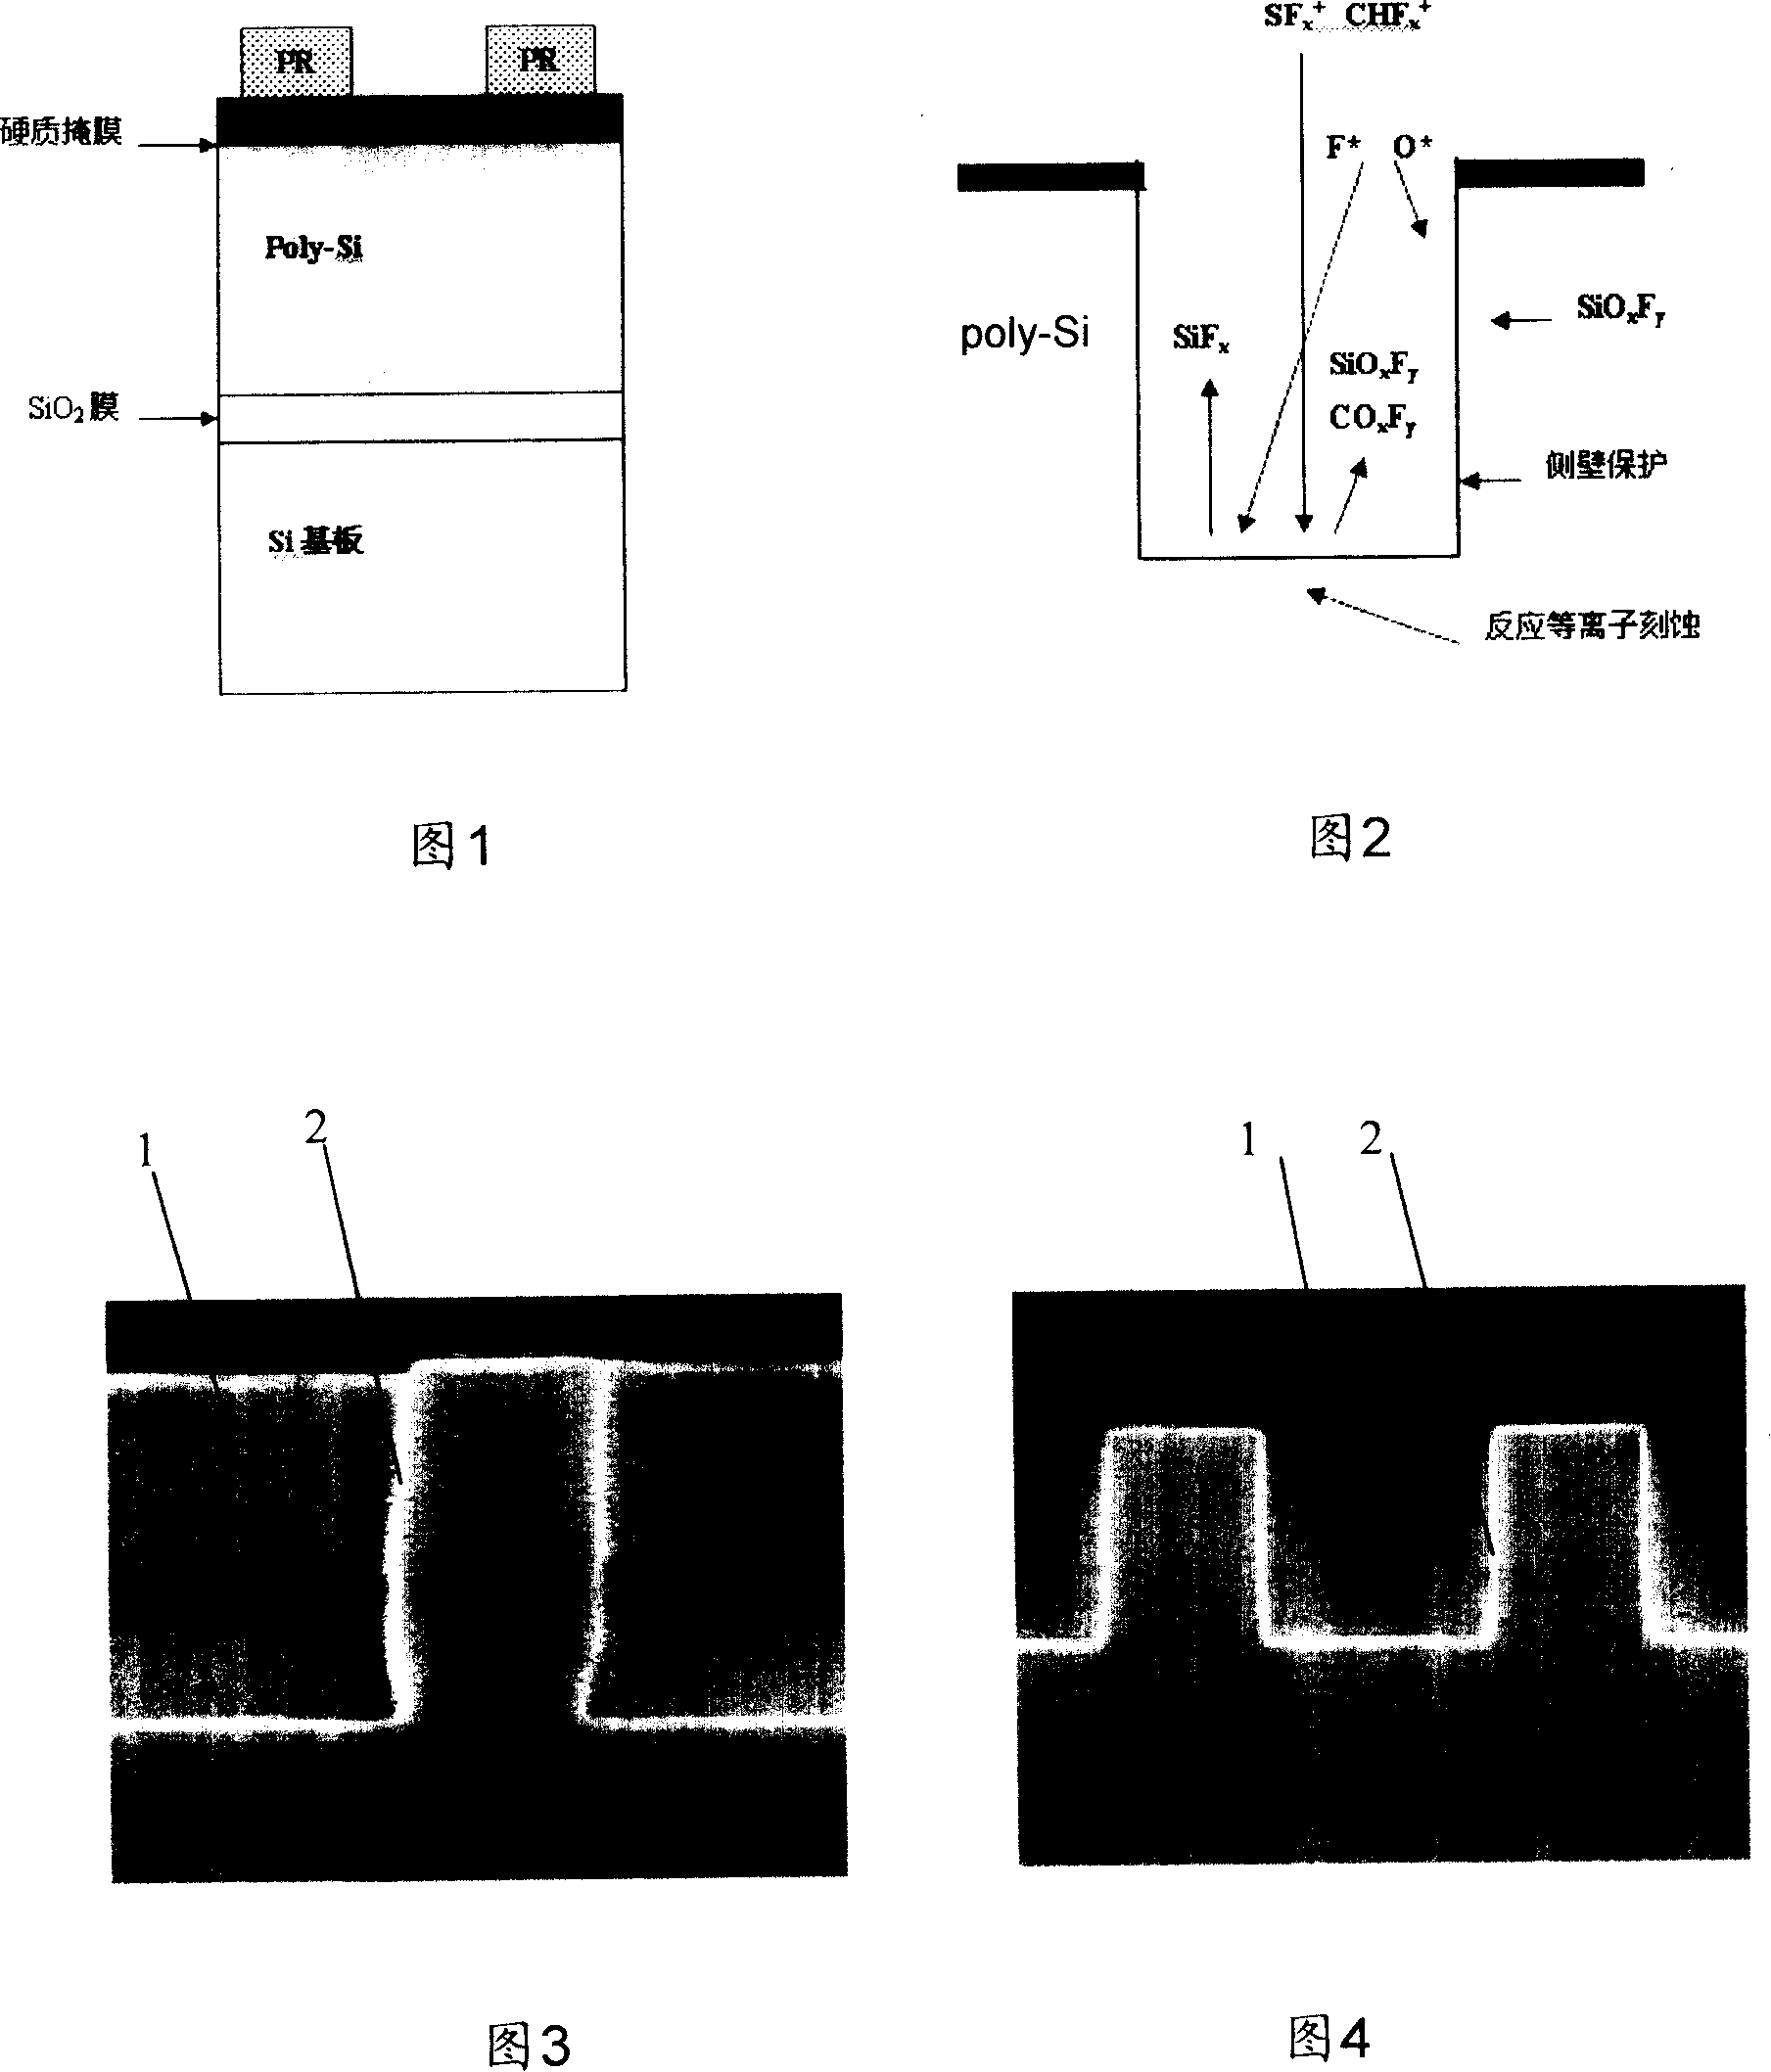 Silicon chip etching method